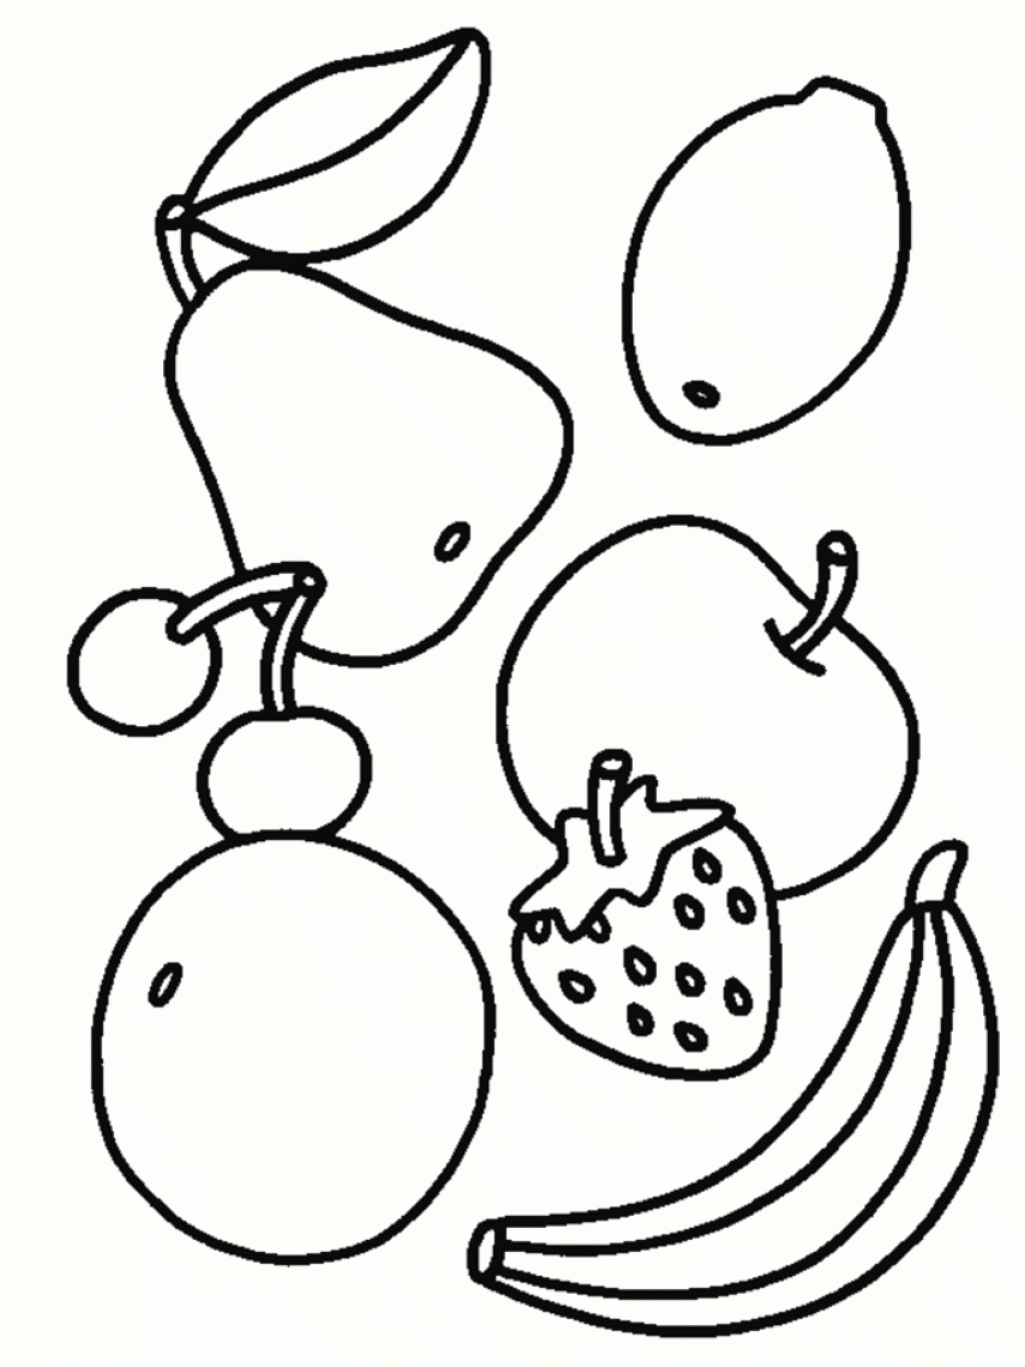 Printable Fruits Coloring Pages For Kids Printable Coloring Sheets ...